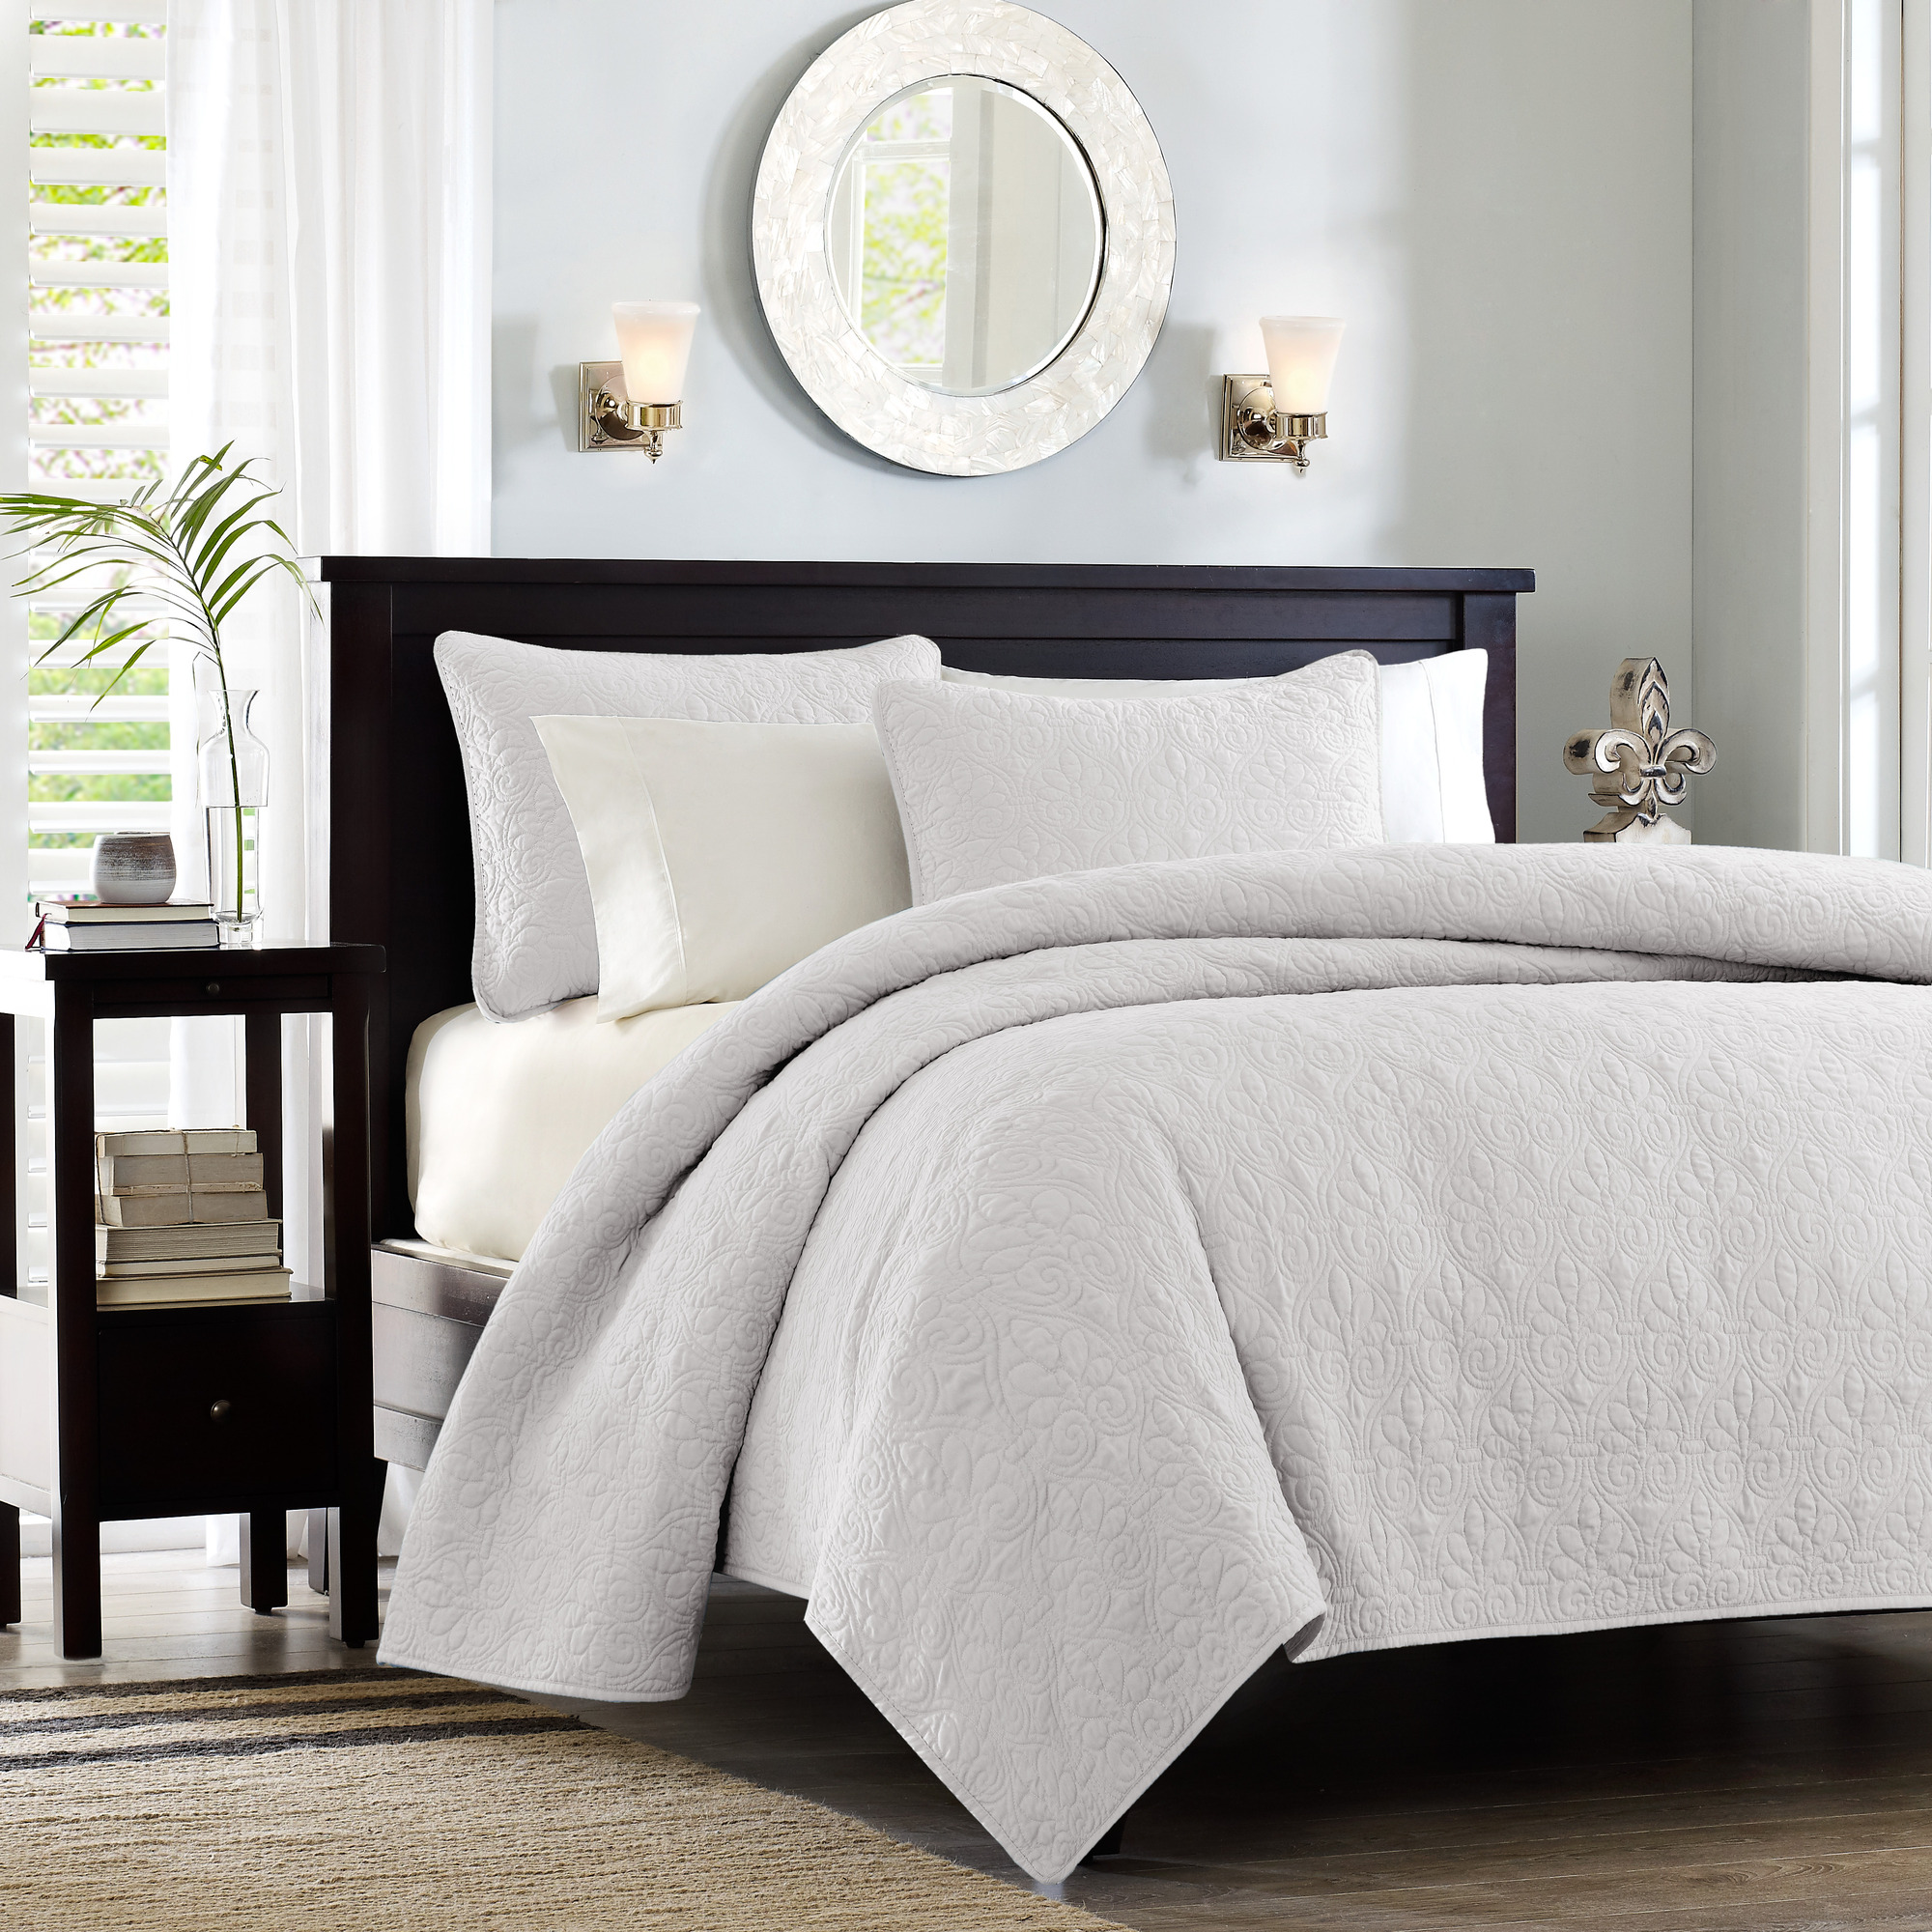 Home Essence Vancouver Super Soft Reversible Coverlet Set, Twin/Twin XL, White - image 1 of 14